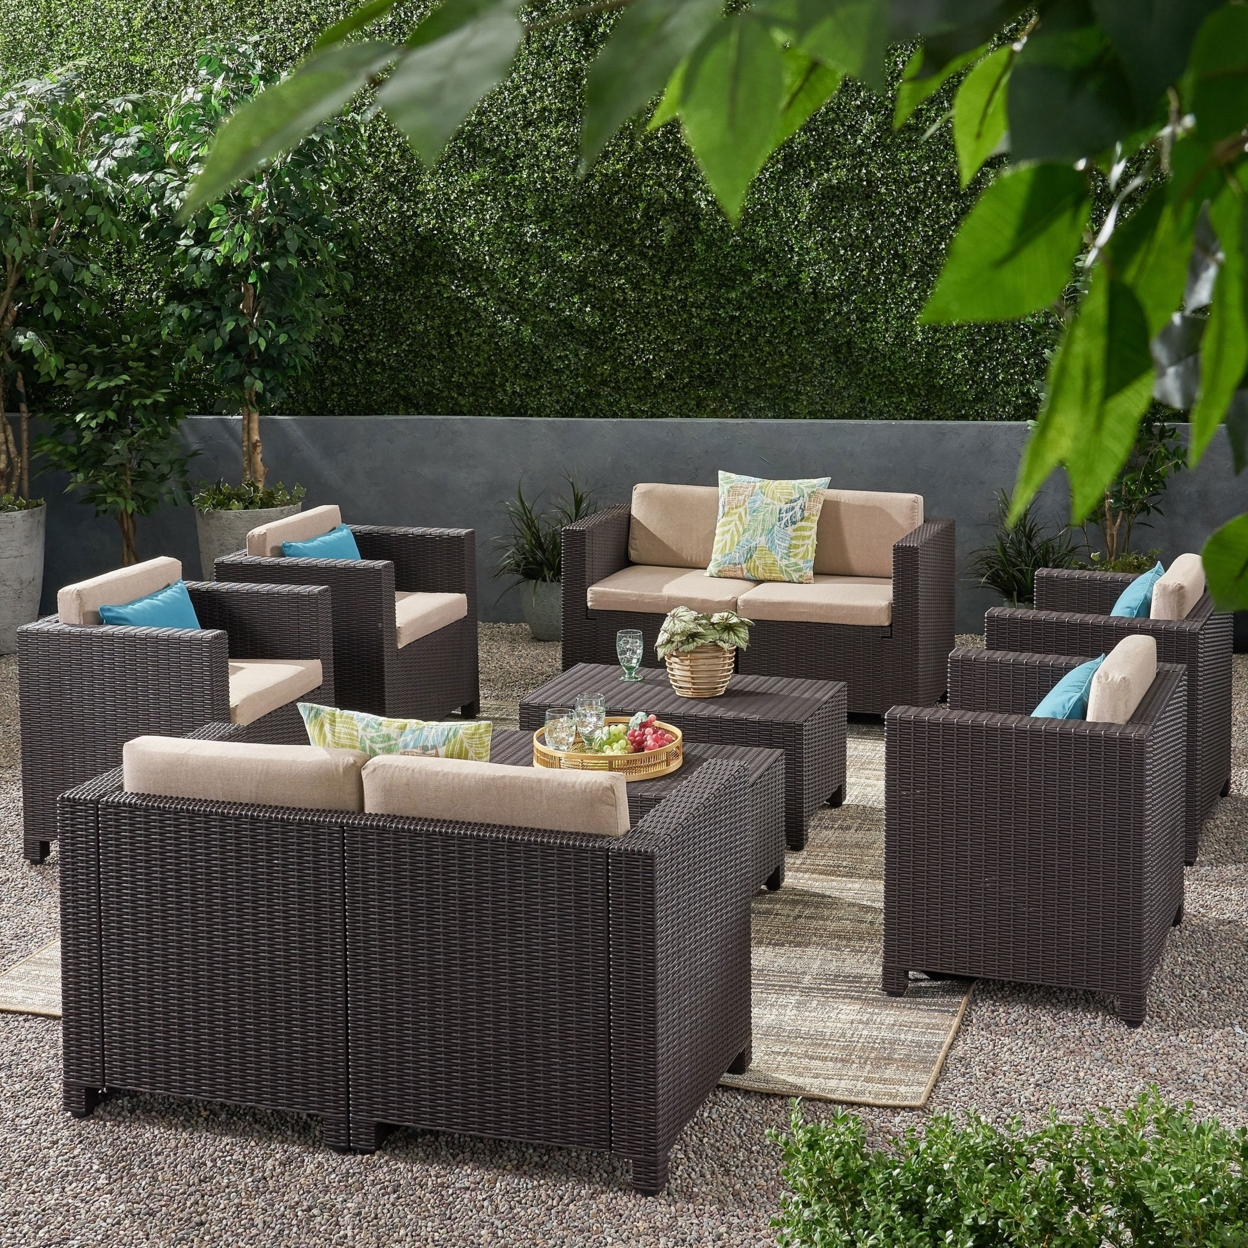 Farirra Outdoor Faux Wicker 8 Seater Chat Set With Cushions - Dark Gray/gray